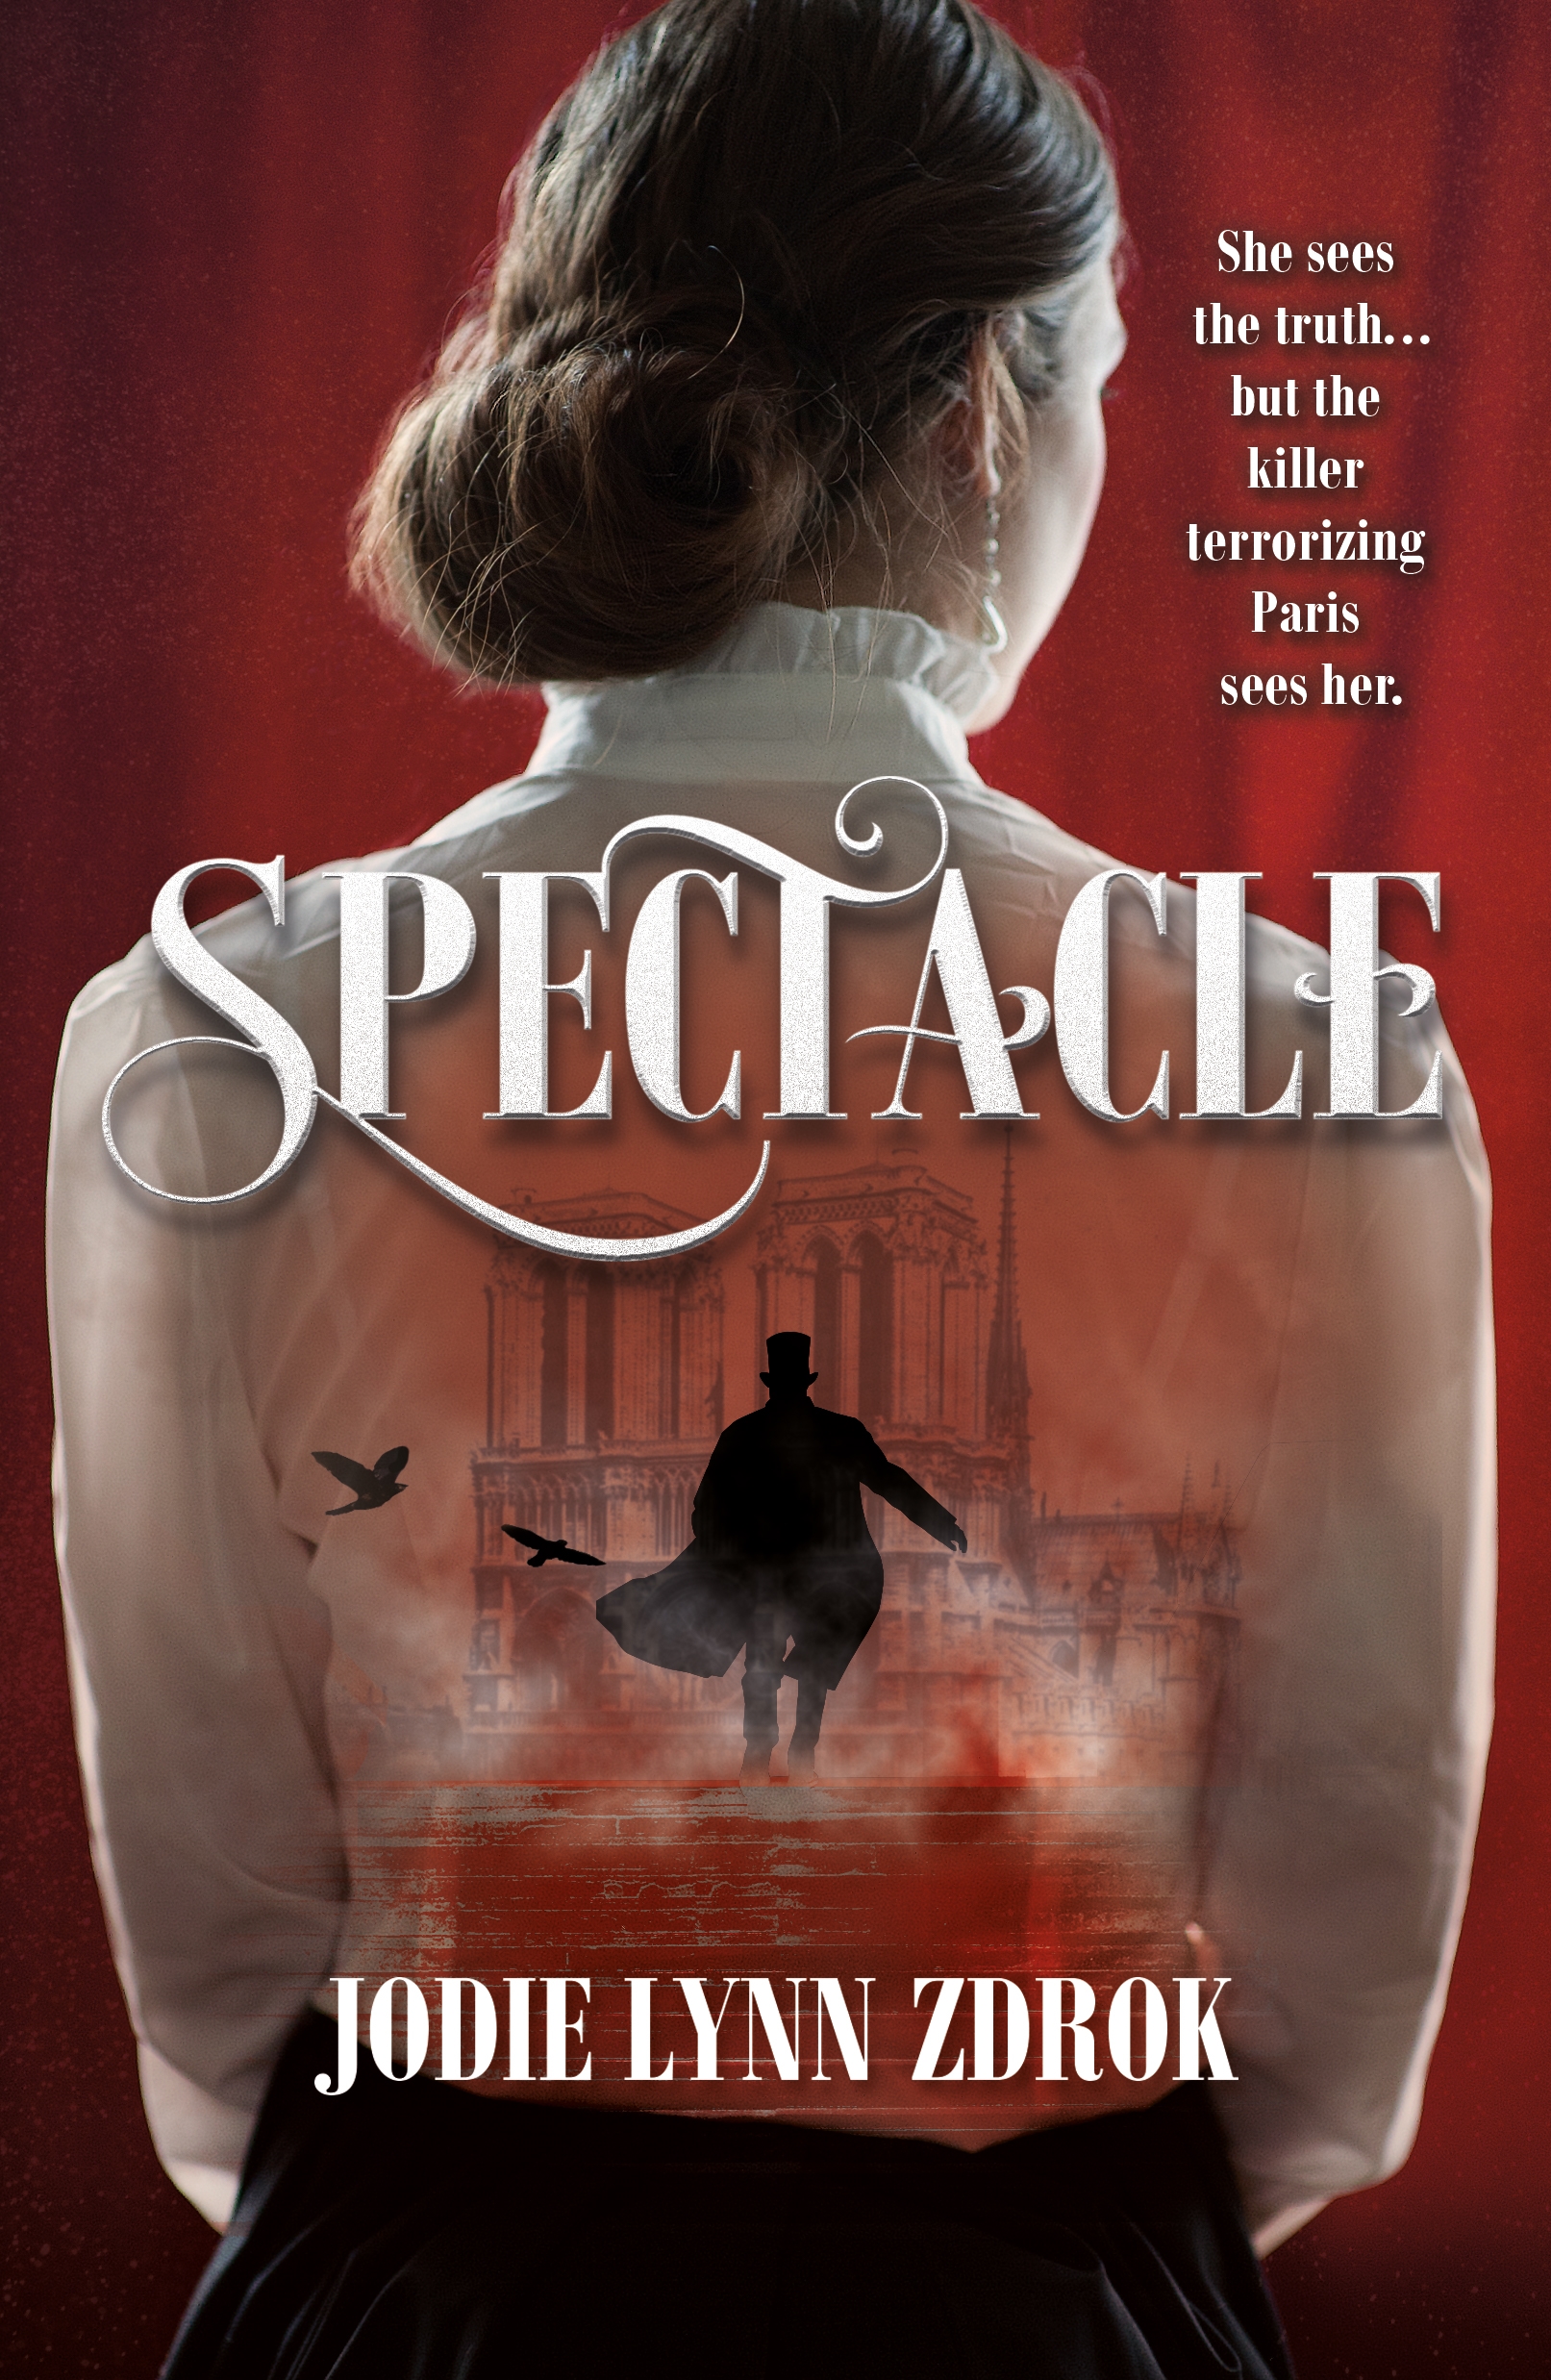 Spectacle : A Historical Thriller in 19th Century Paris by Jodie Lynn Zdrok